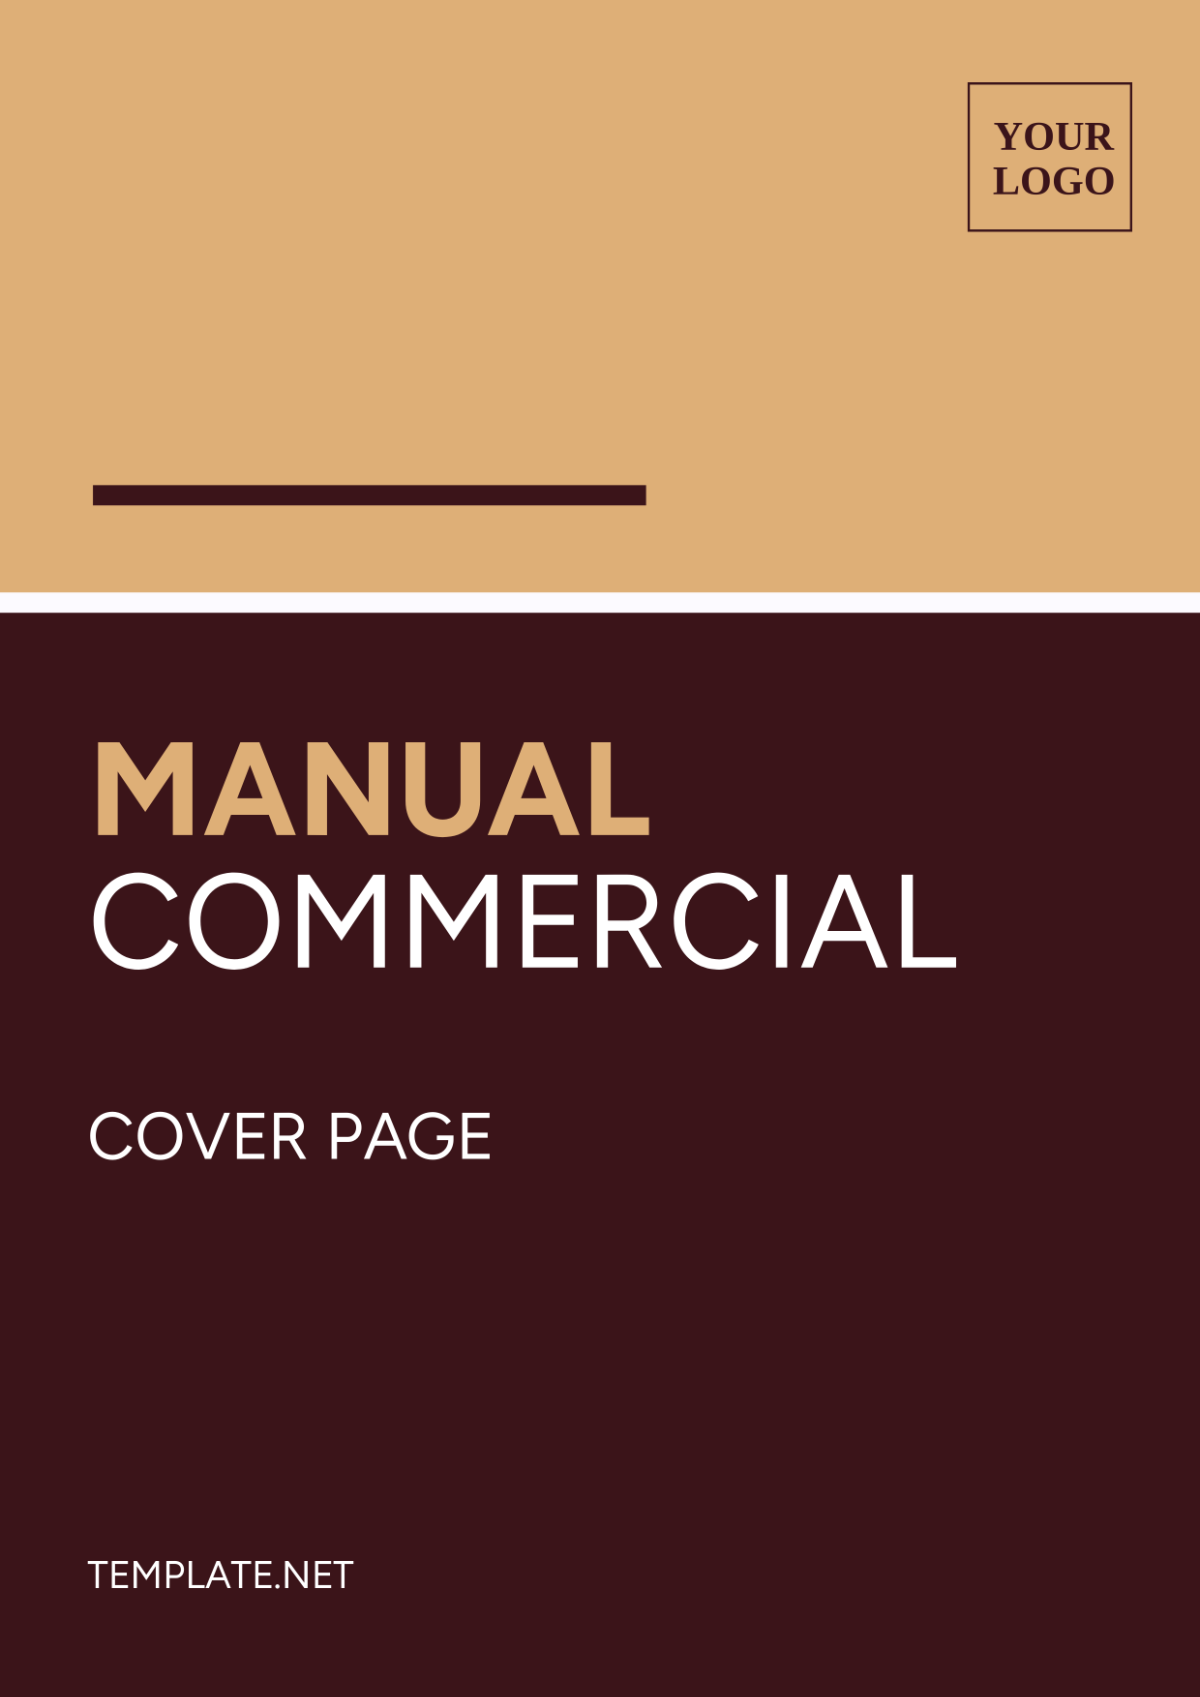 Manual Commercial Cover Page